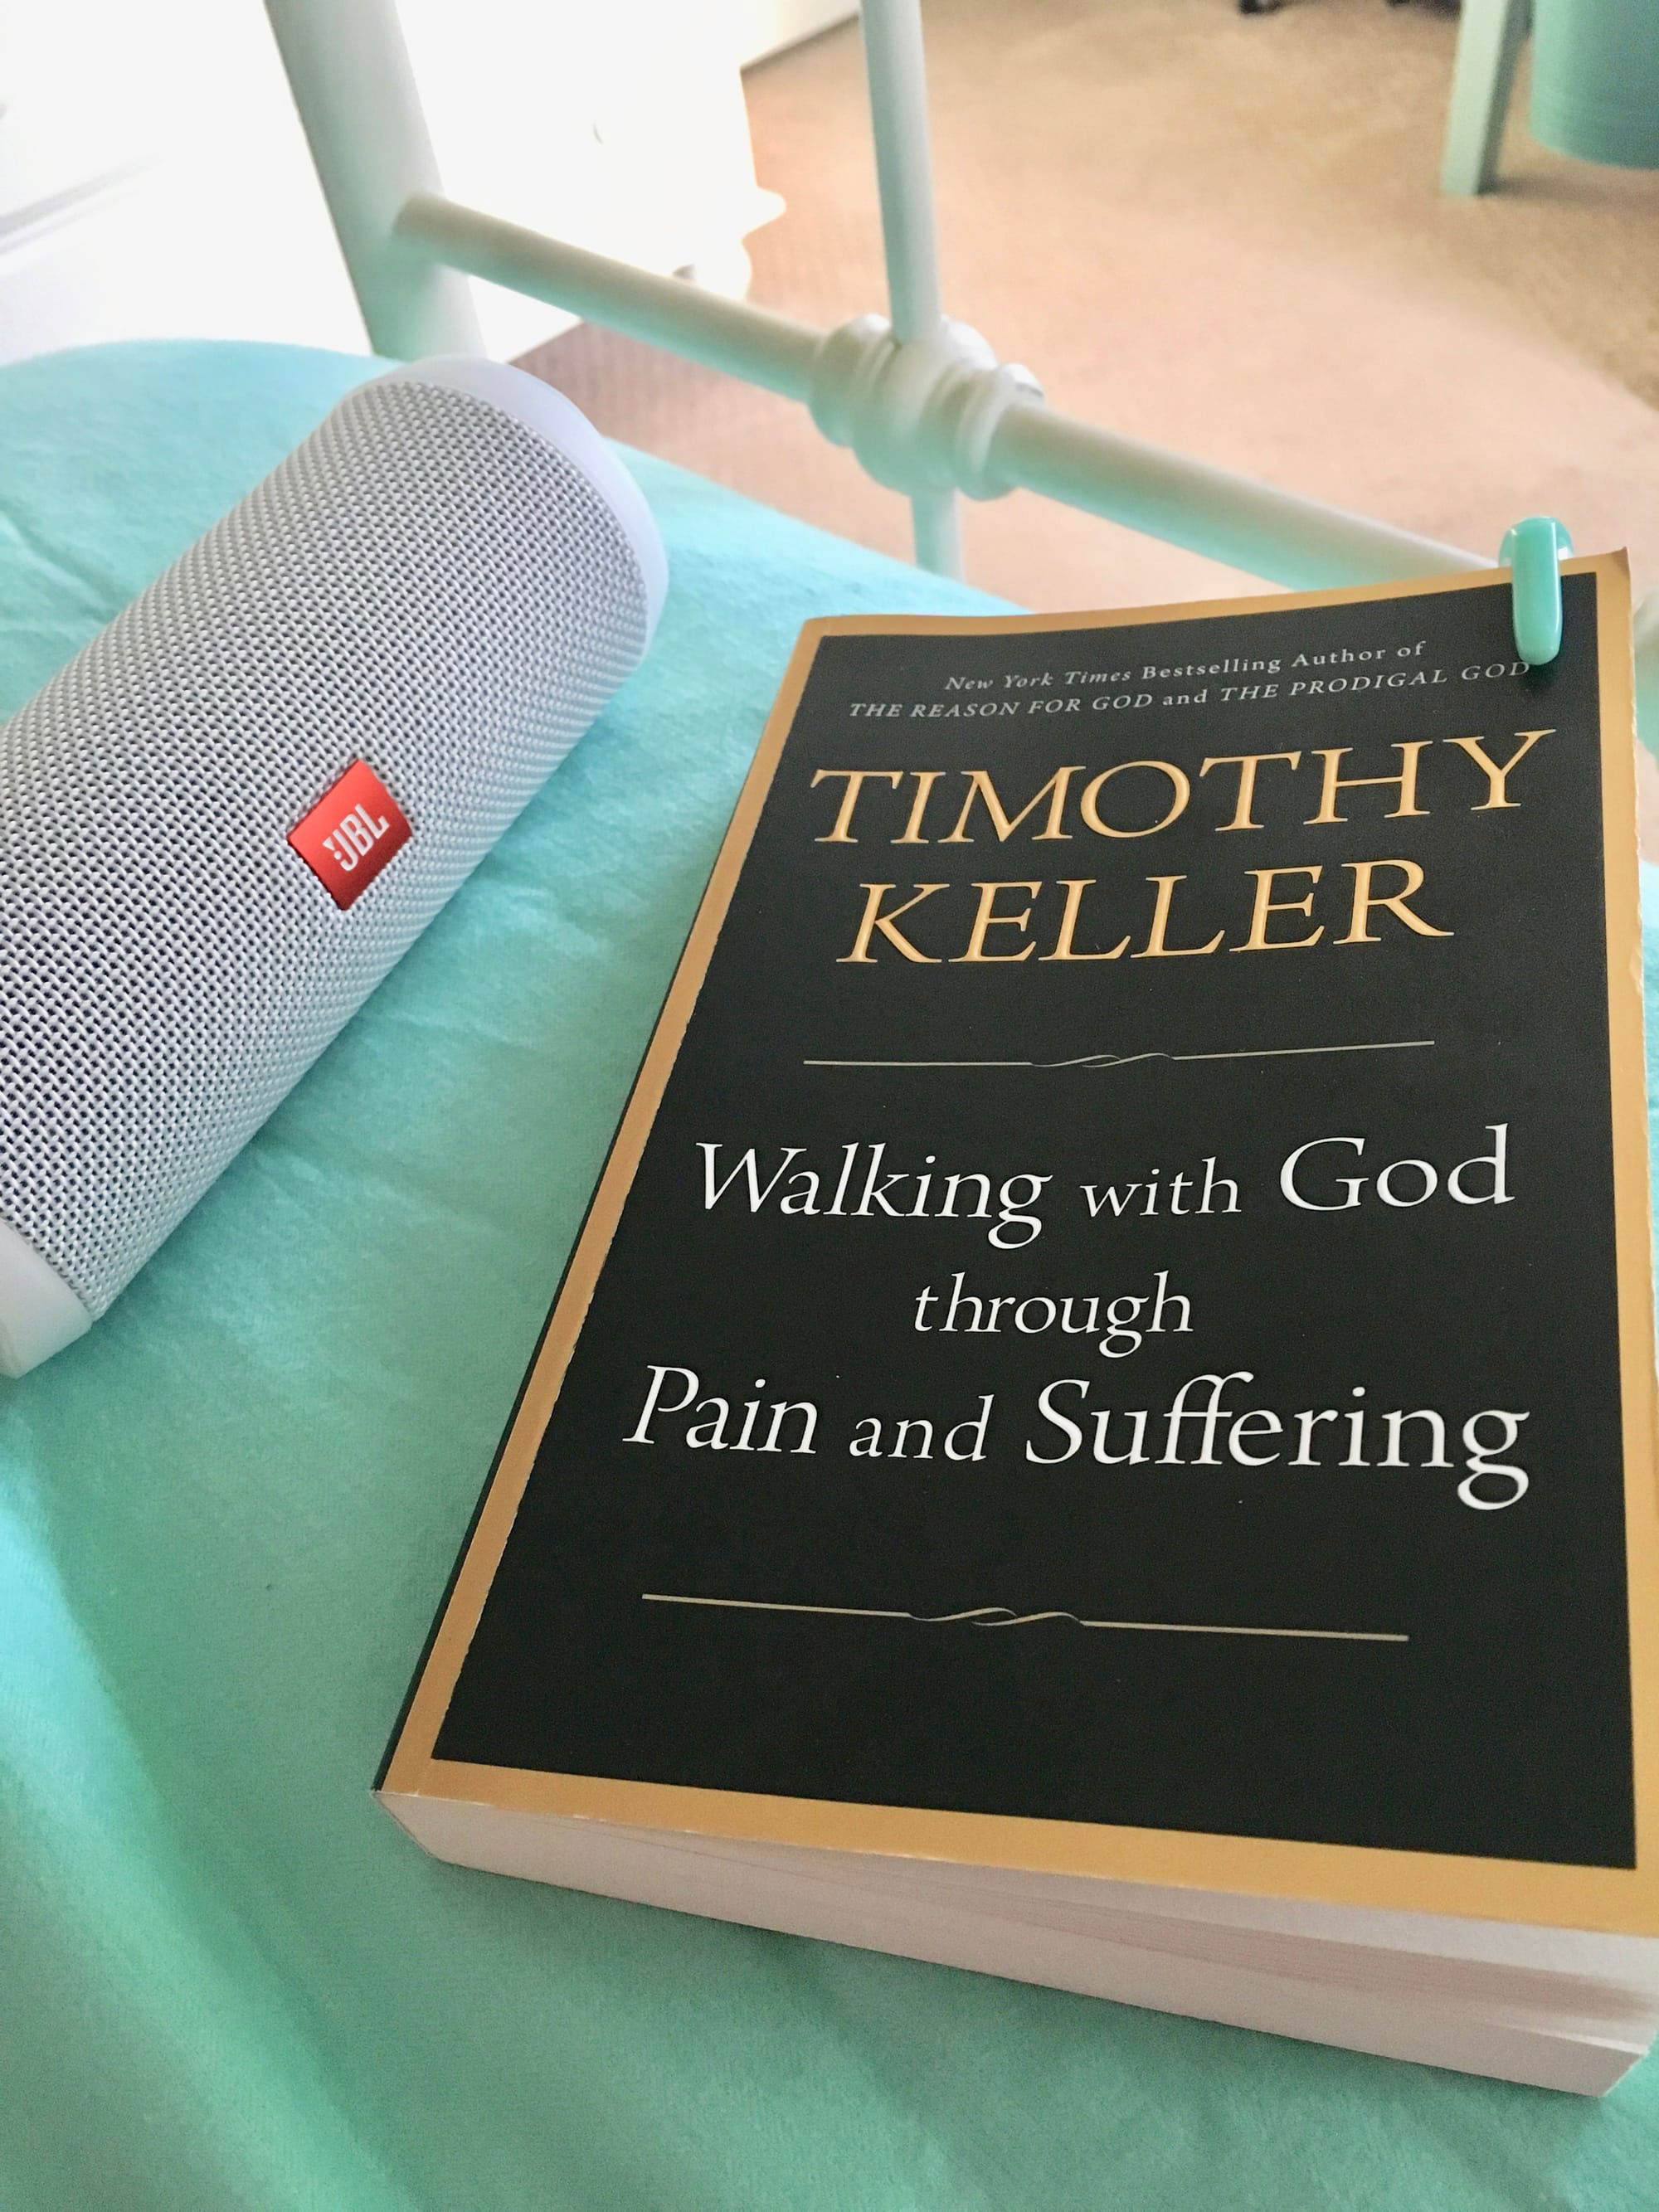 Walking with God through Pain and Suffering